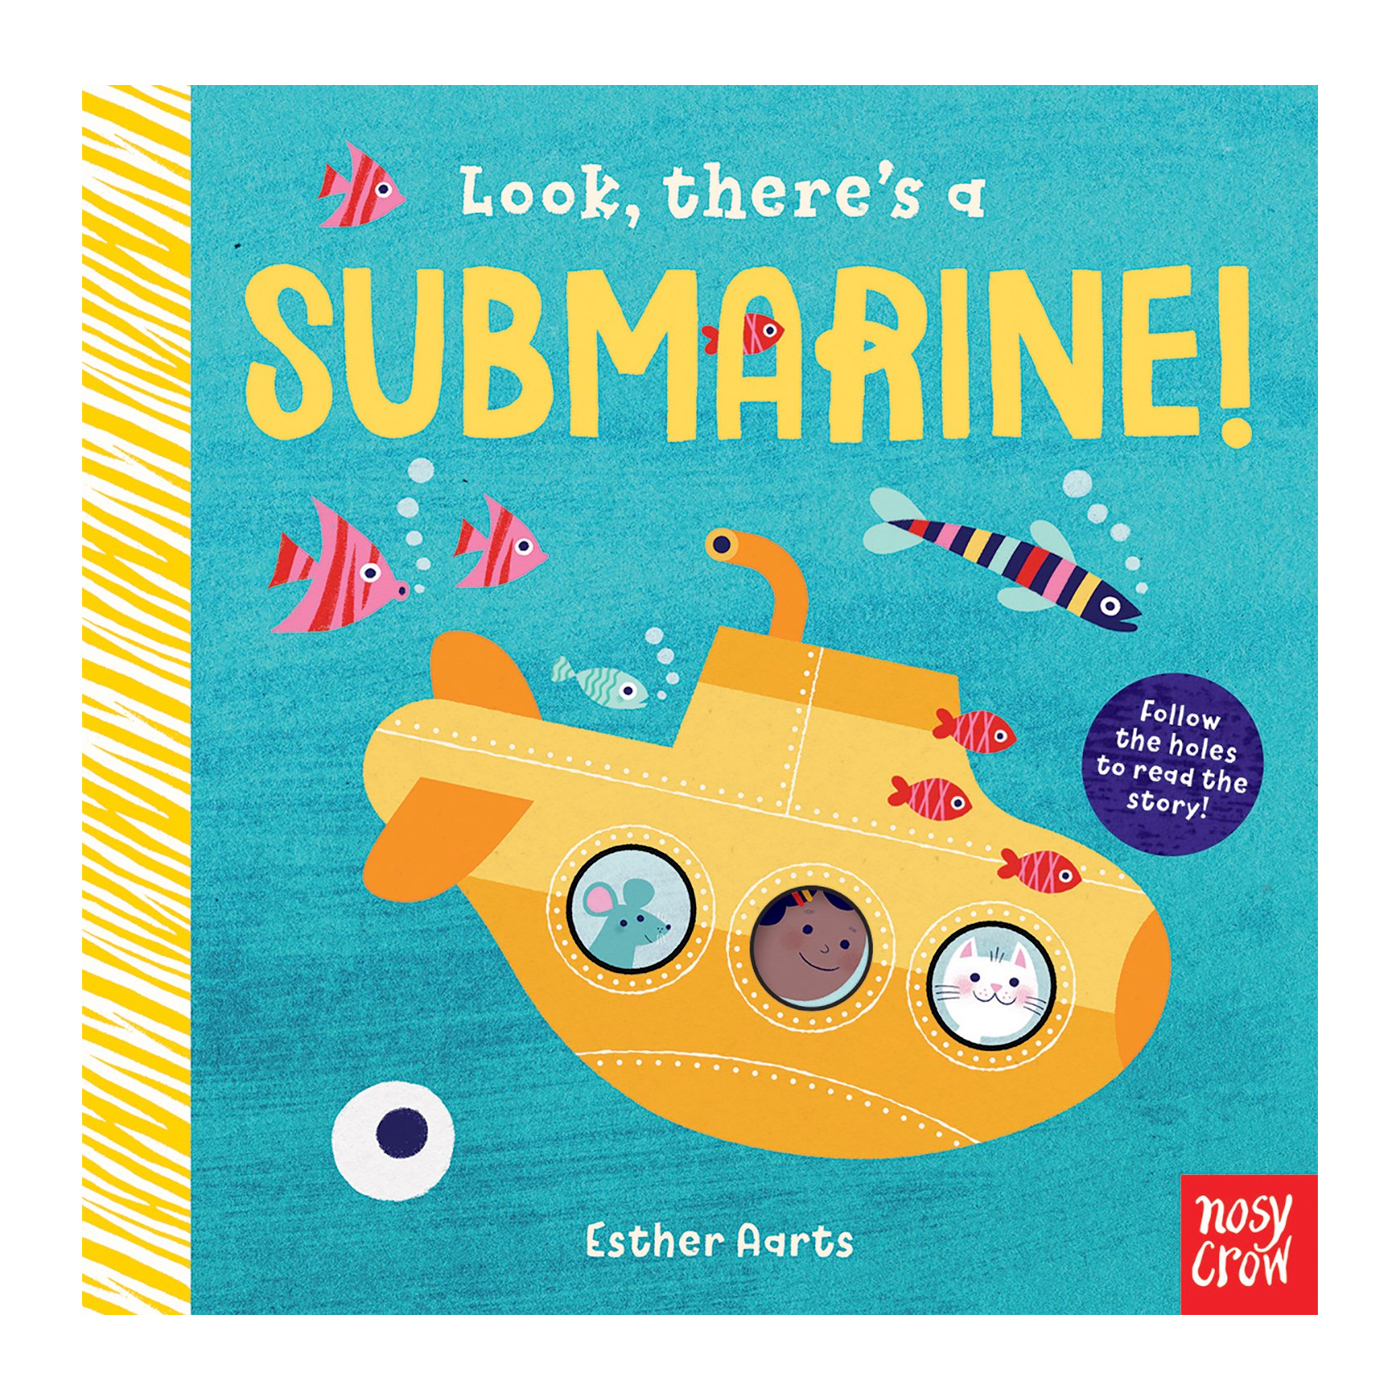  Look there's a Submarine!